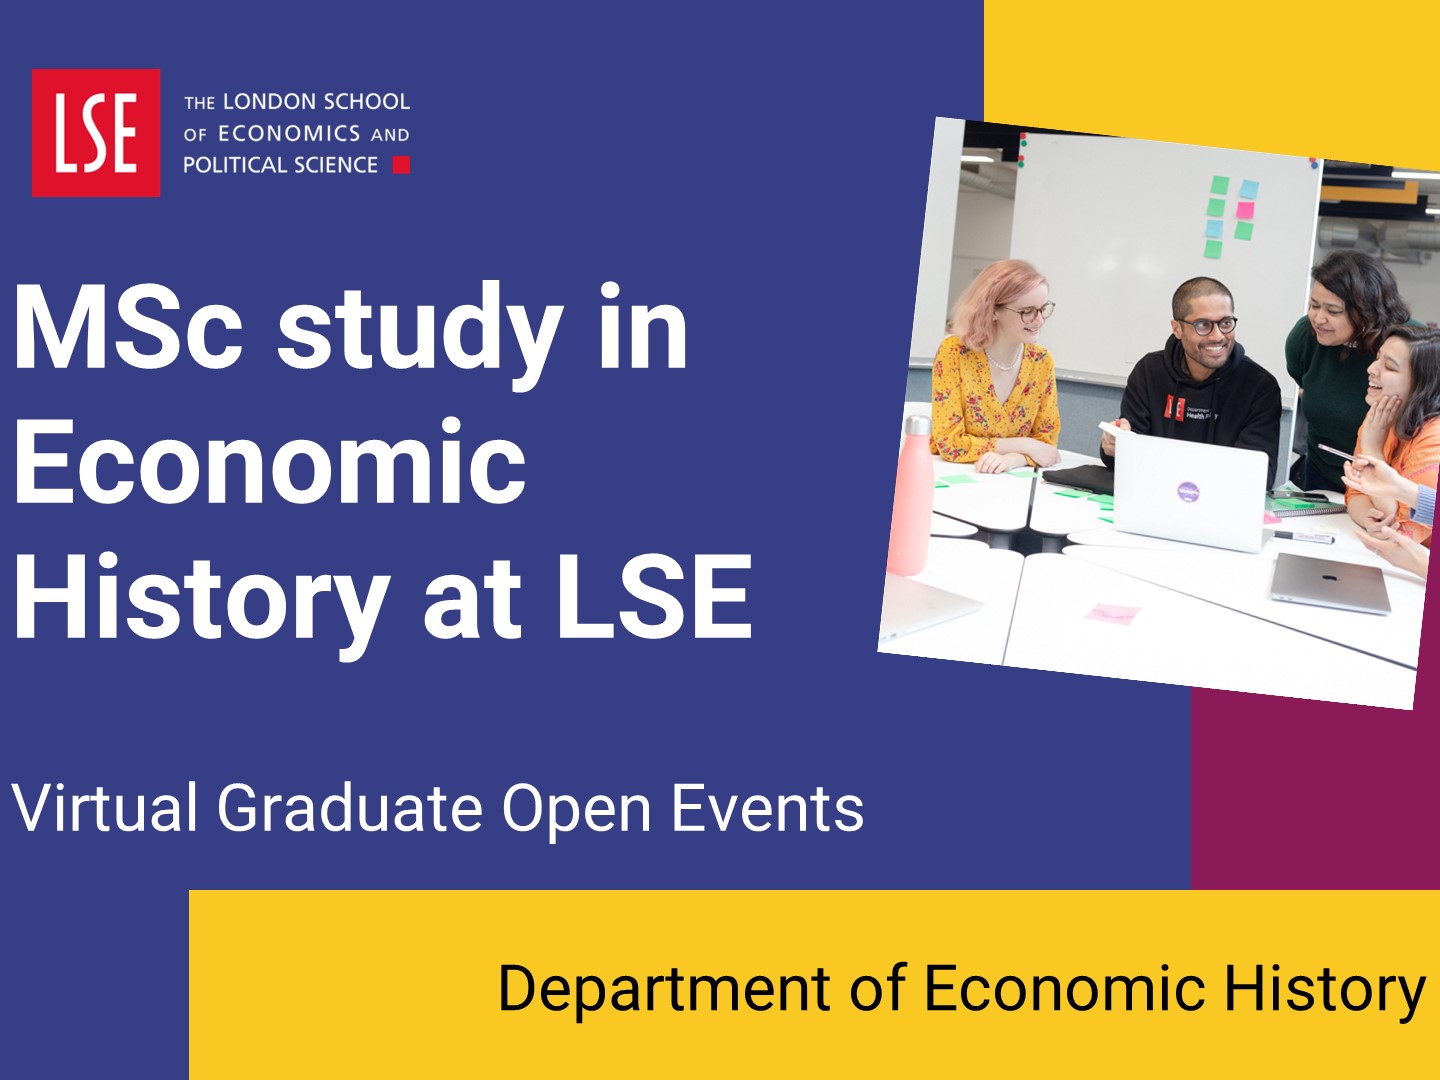 Introduction to MSc study in Economic History